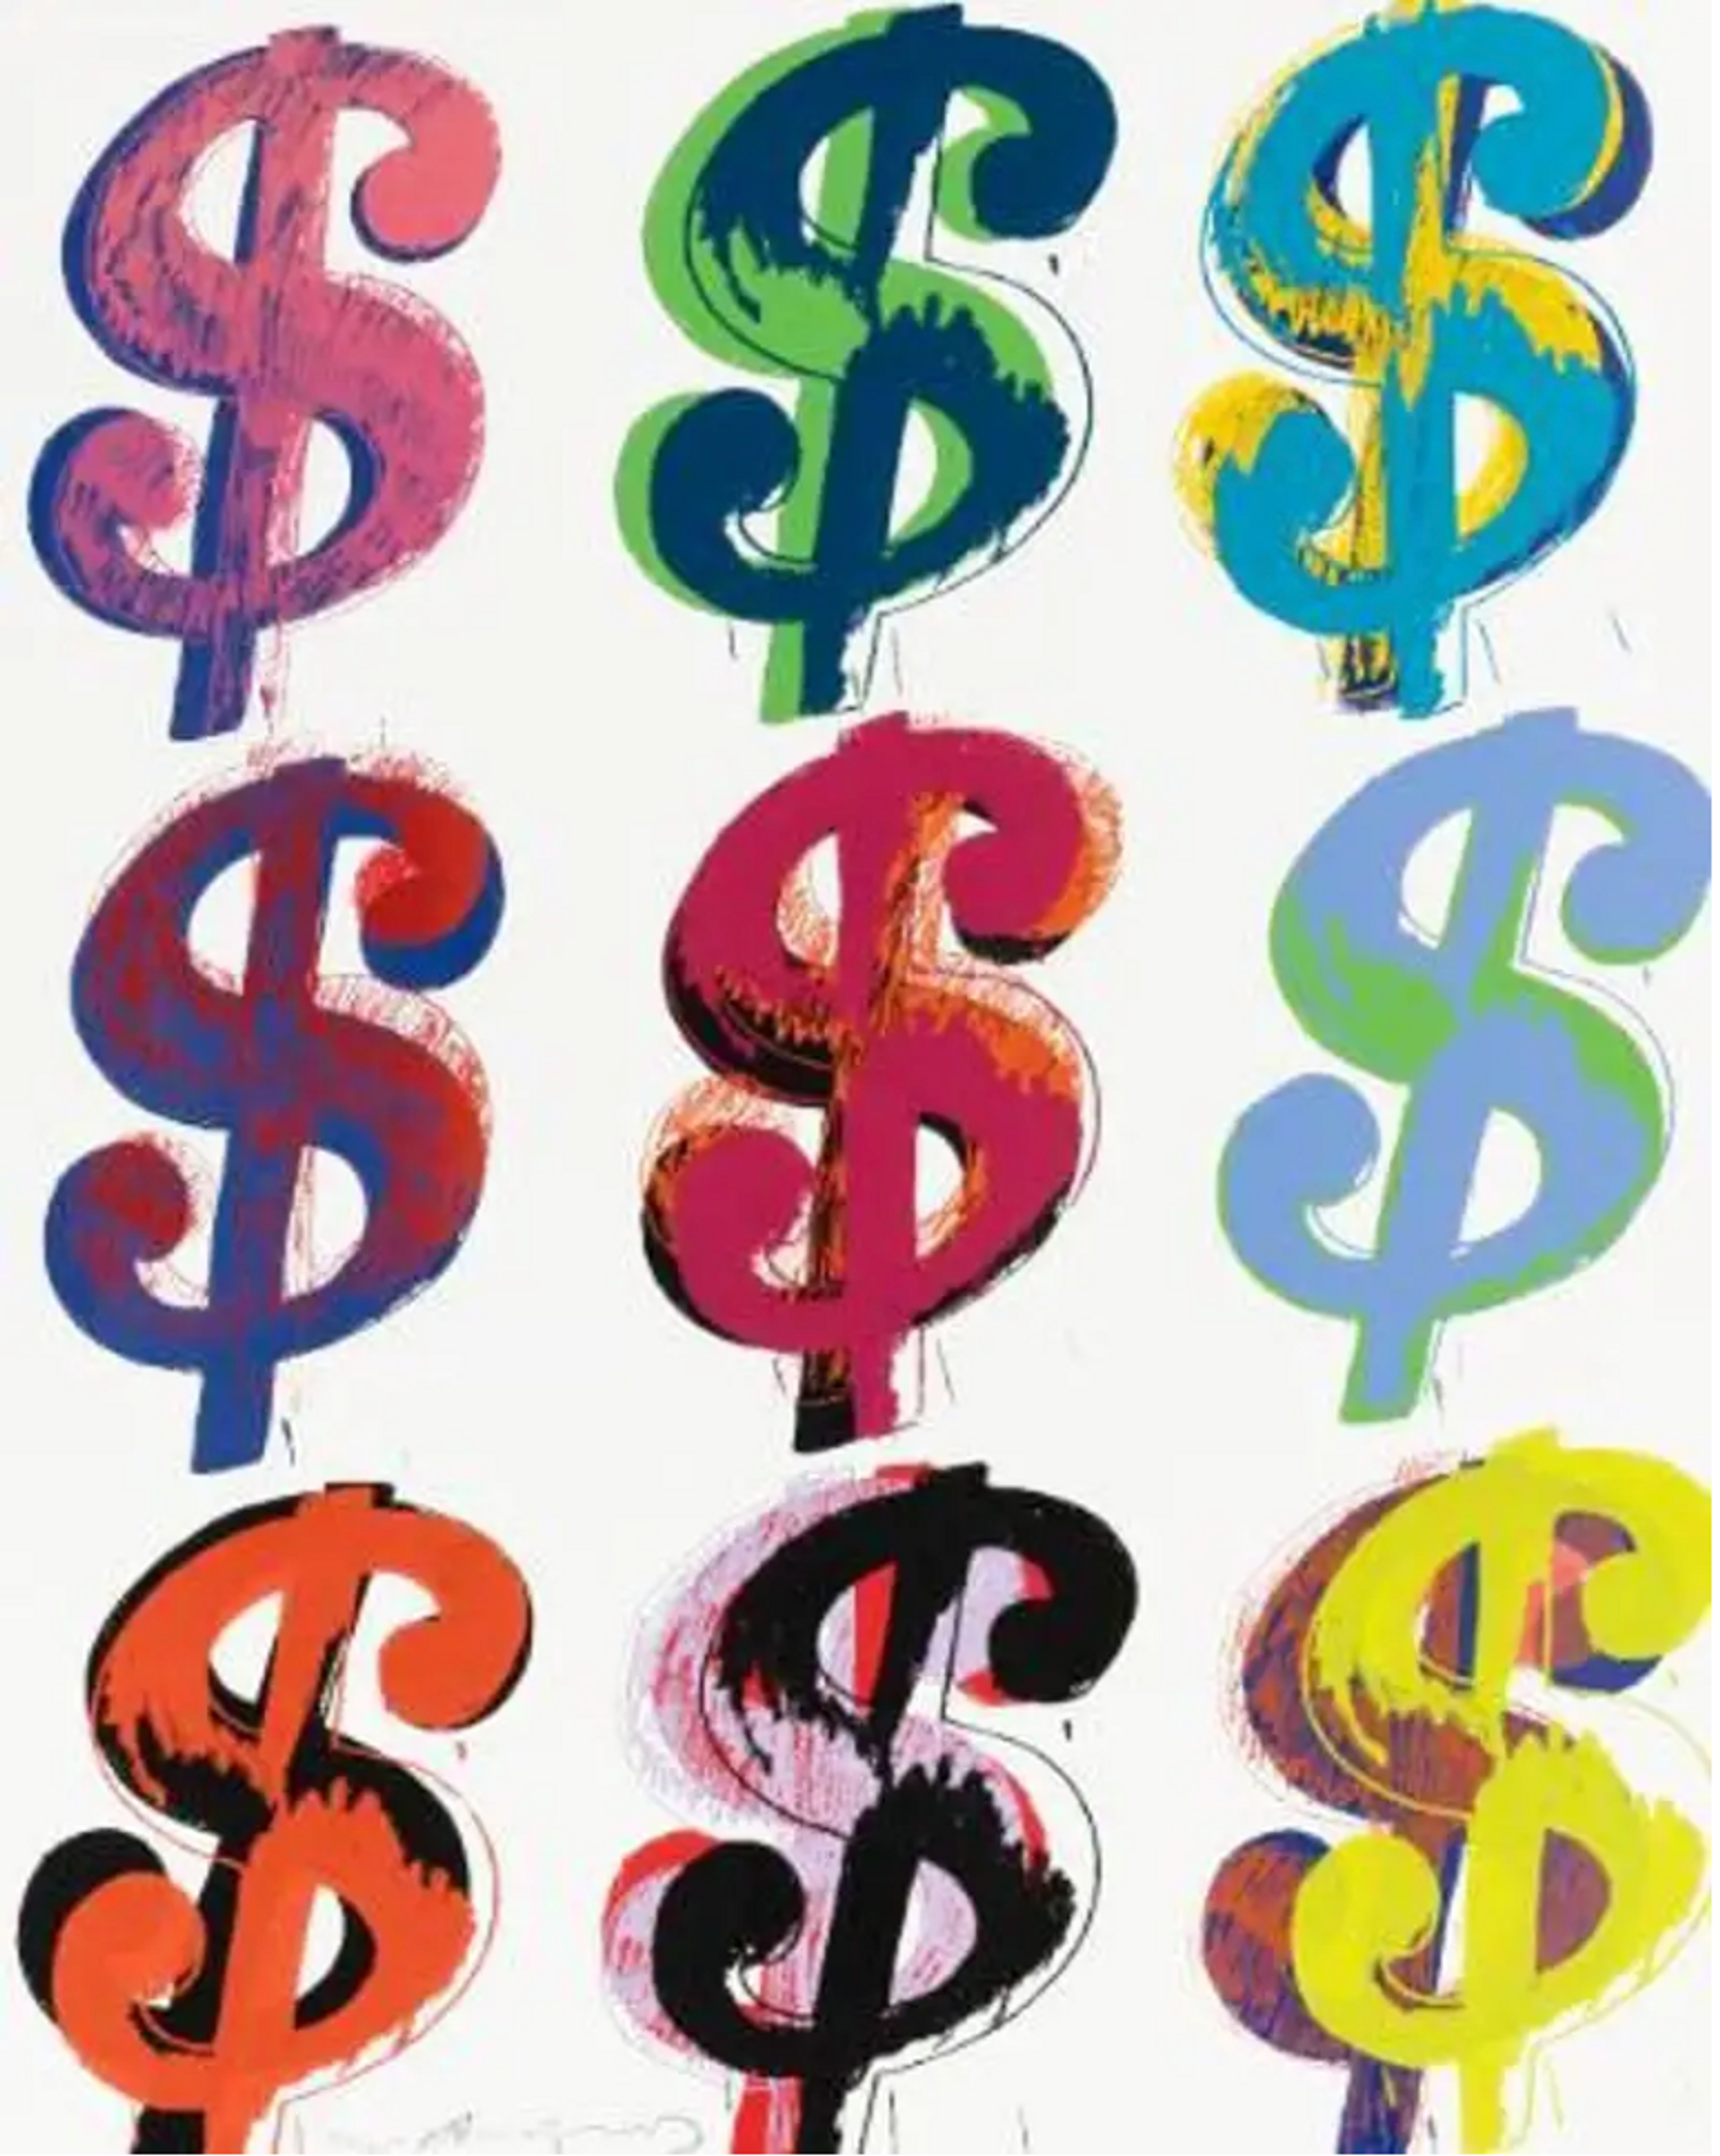 Dollar Sign 9 (F. & S. II.286) by Andy Warhol